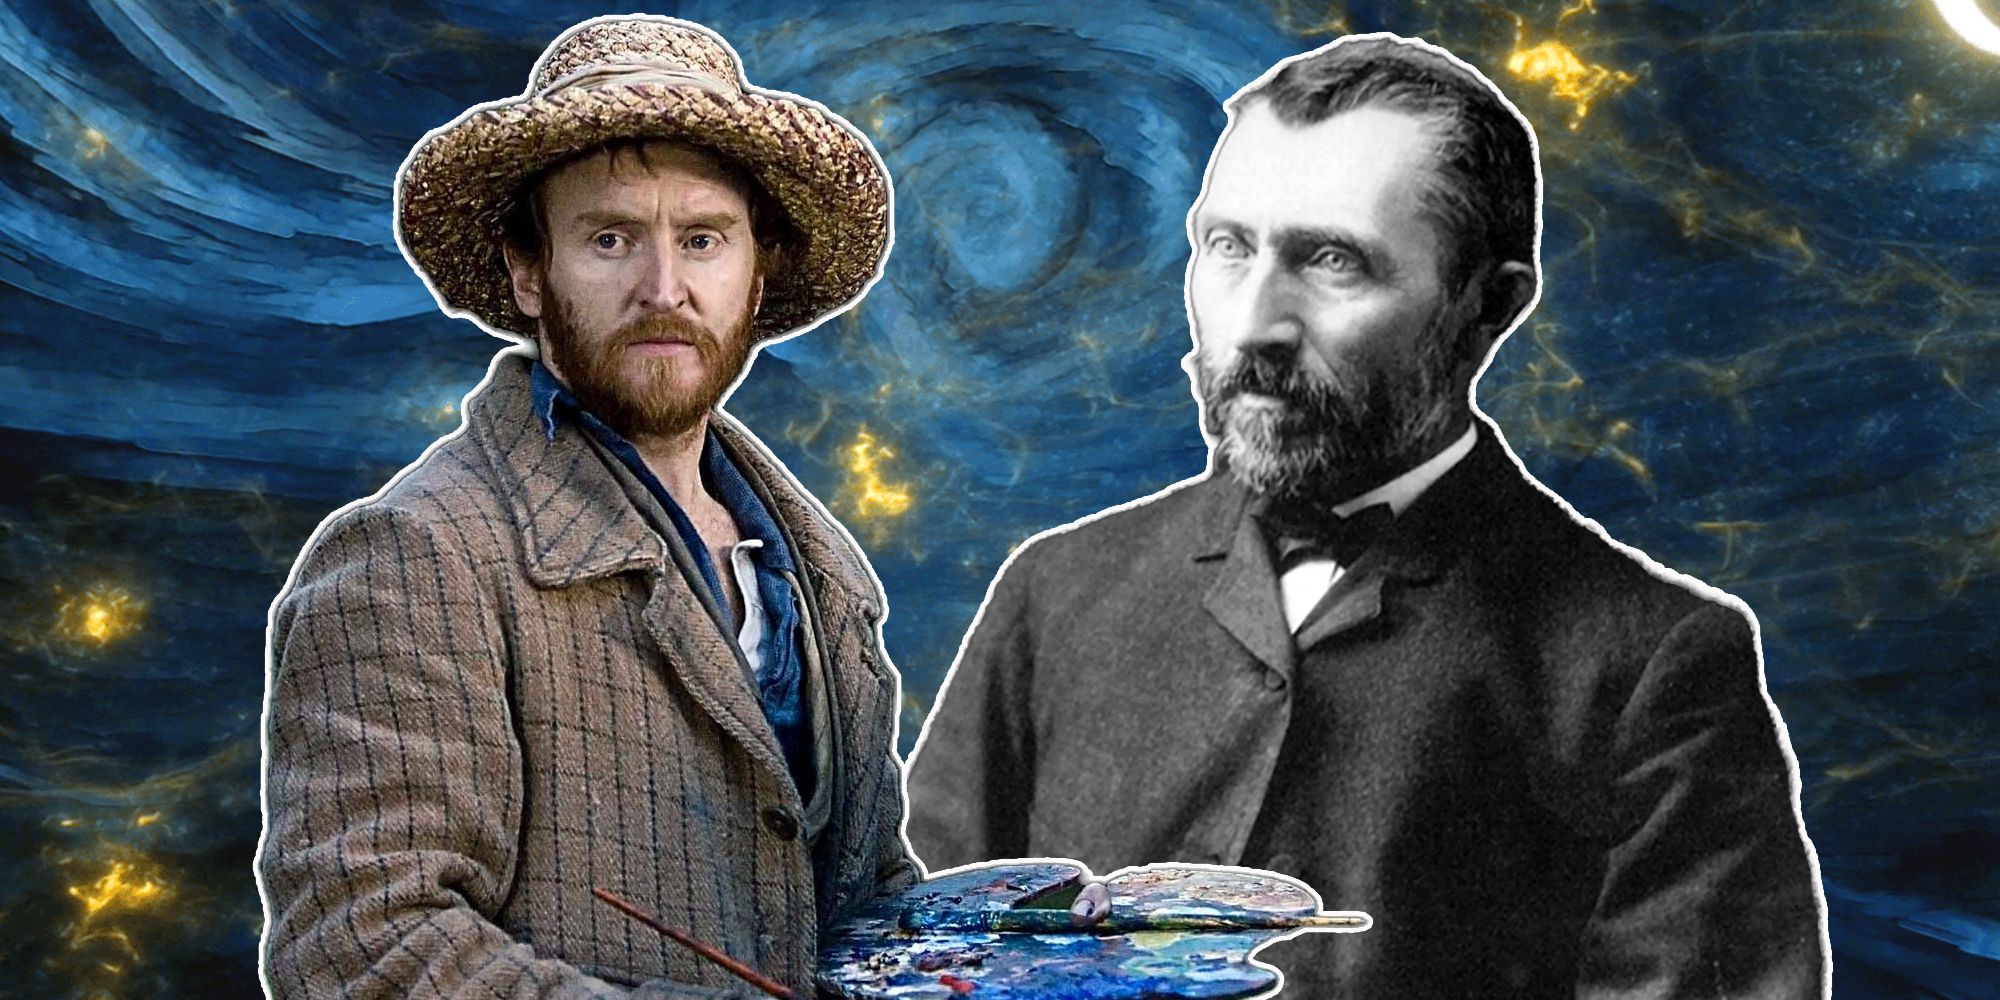 Vincent van Gogh's (Tony Curran) painting was integral to the Doctor's discover of the Pandorica